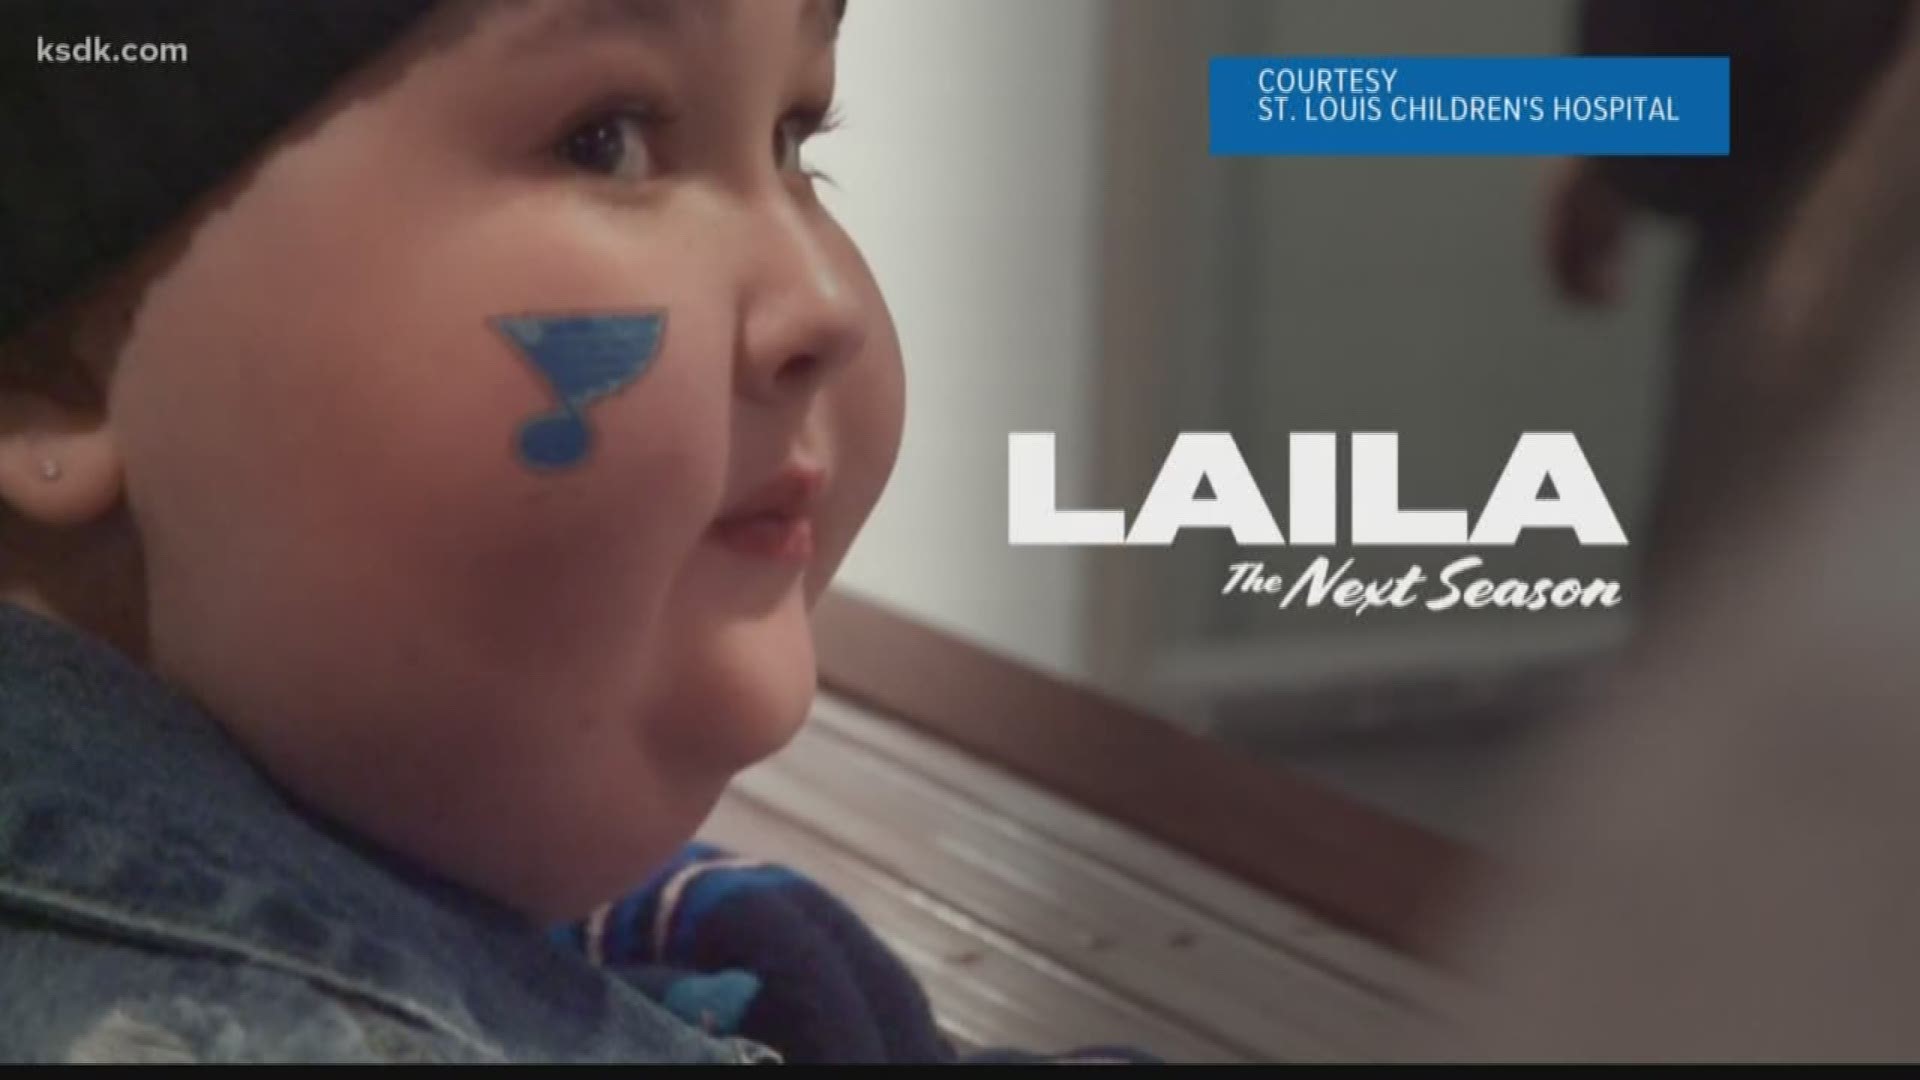 The documentary tells the behind-the-scenes story of Laila overcoming a rare disease. It will take a deeper dive into her breakthrough treatment and recovery.